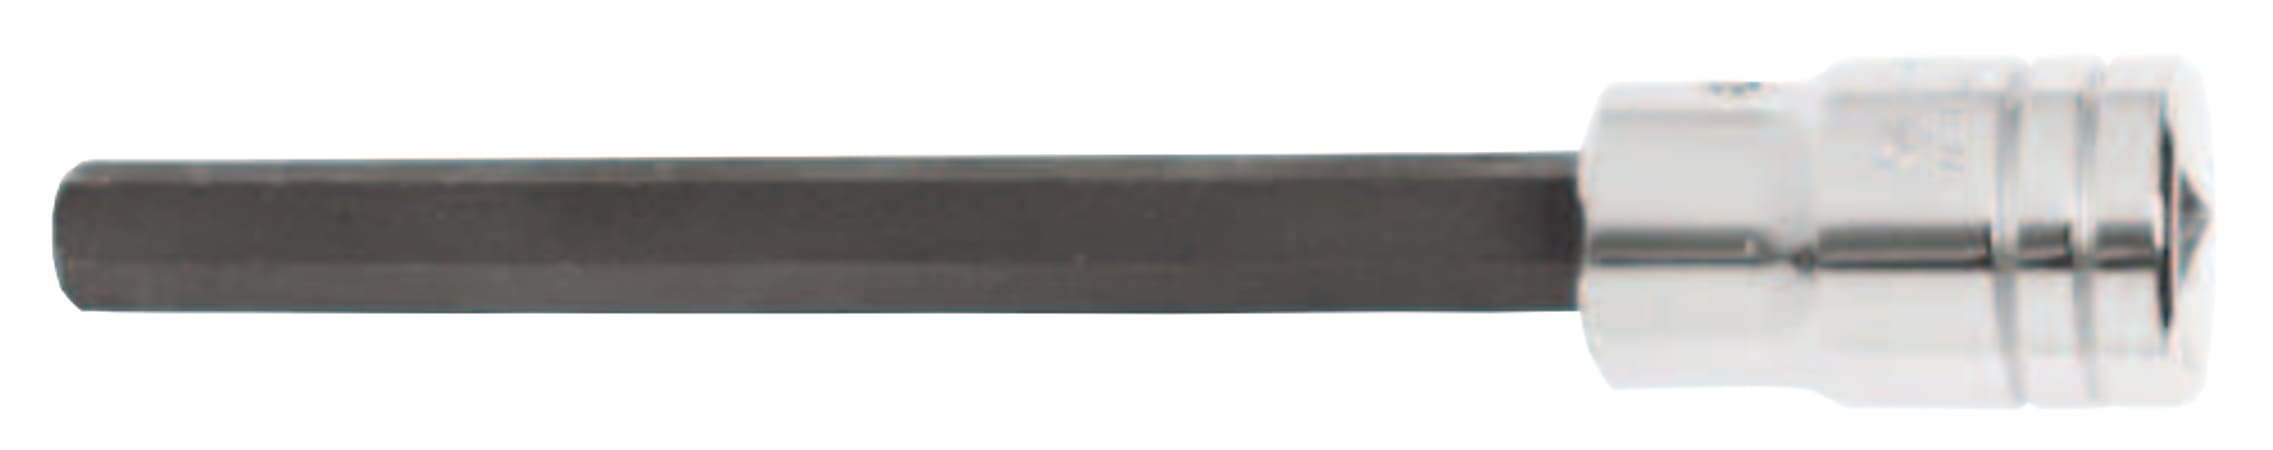 Extra-Long Socket Bits, 1/2 in Drive, 5/16 in Tip